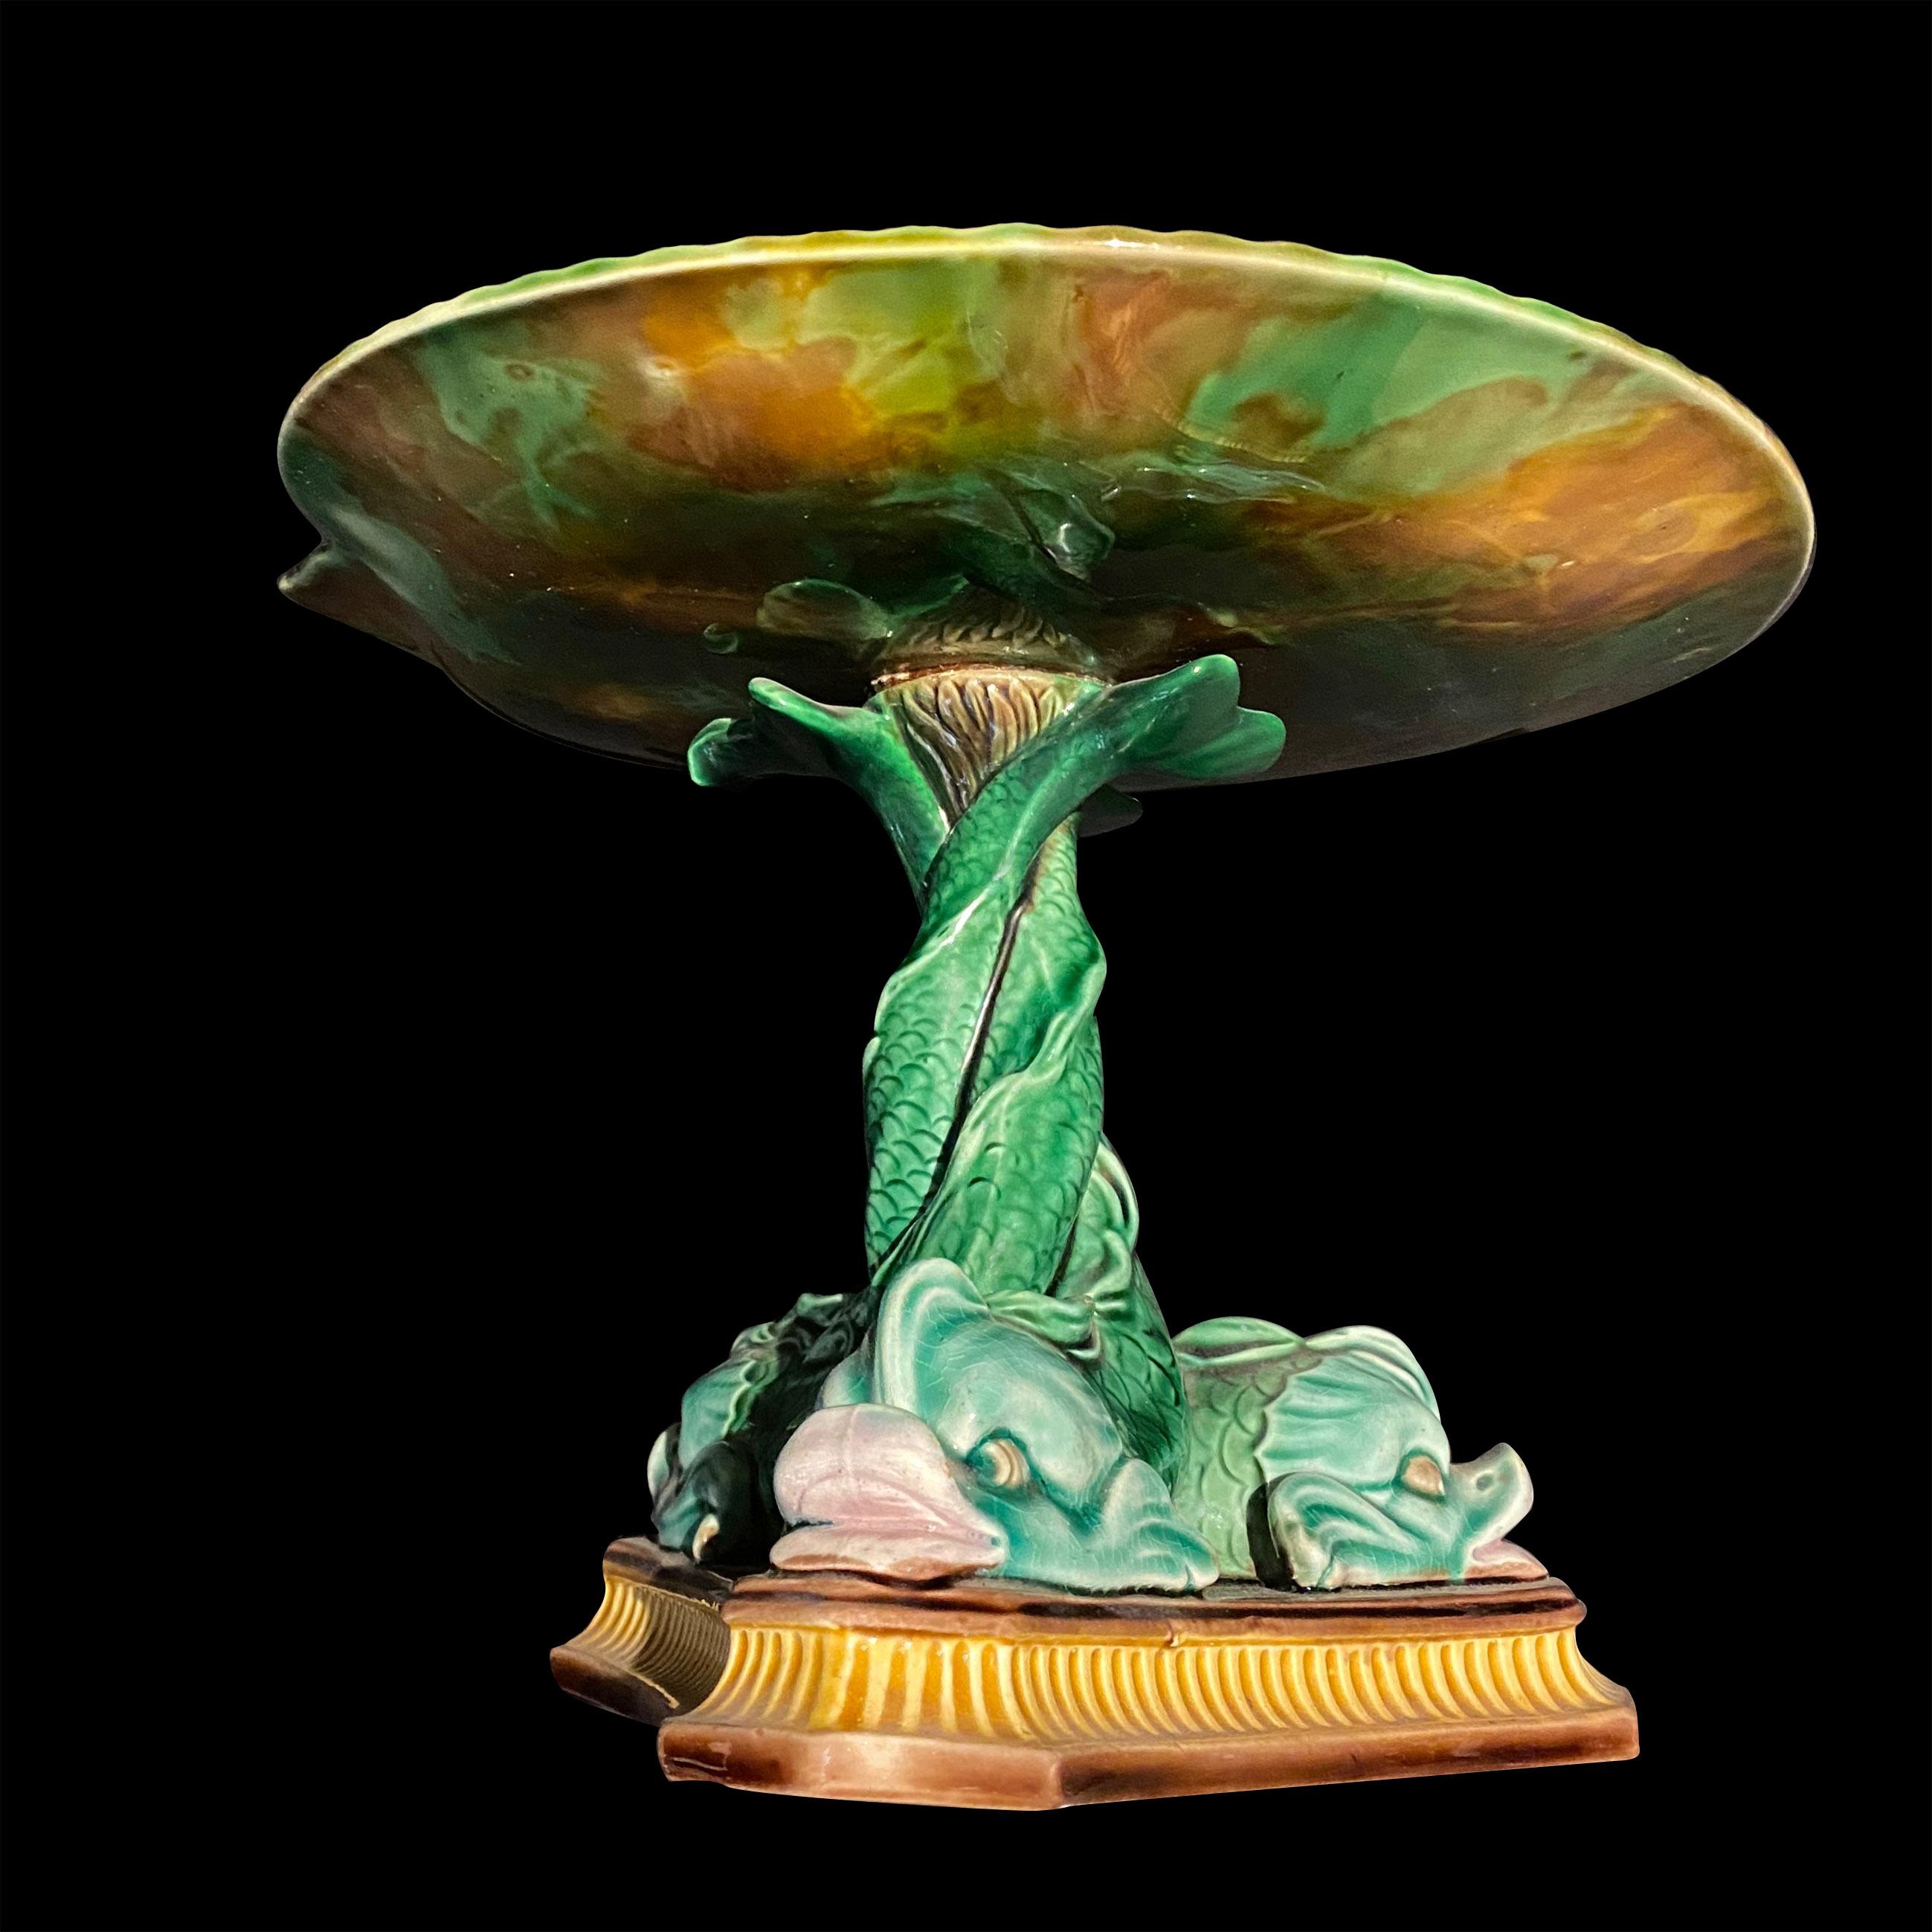 This Wedgwood tazza is decorative Delphin is a brightly decorated compote presented as a large clamshell mounted on three dolphins on a three-point base. In typical Majolica colors, precise and well-sculpted (as it is at the beginning of the mold